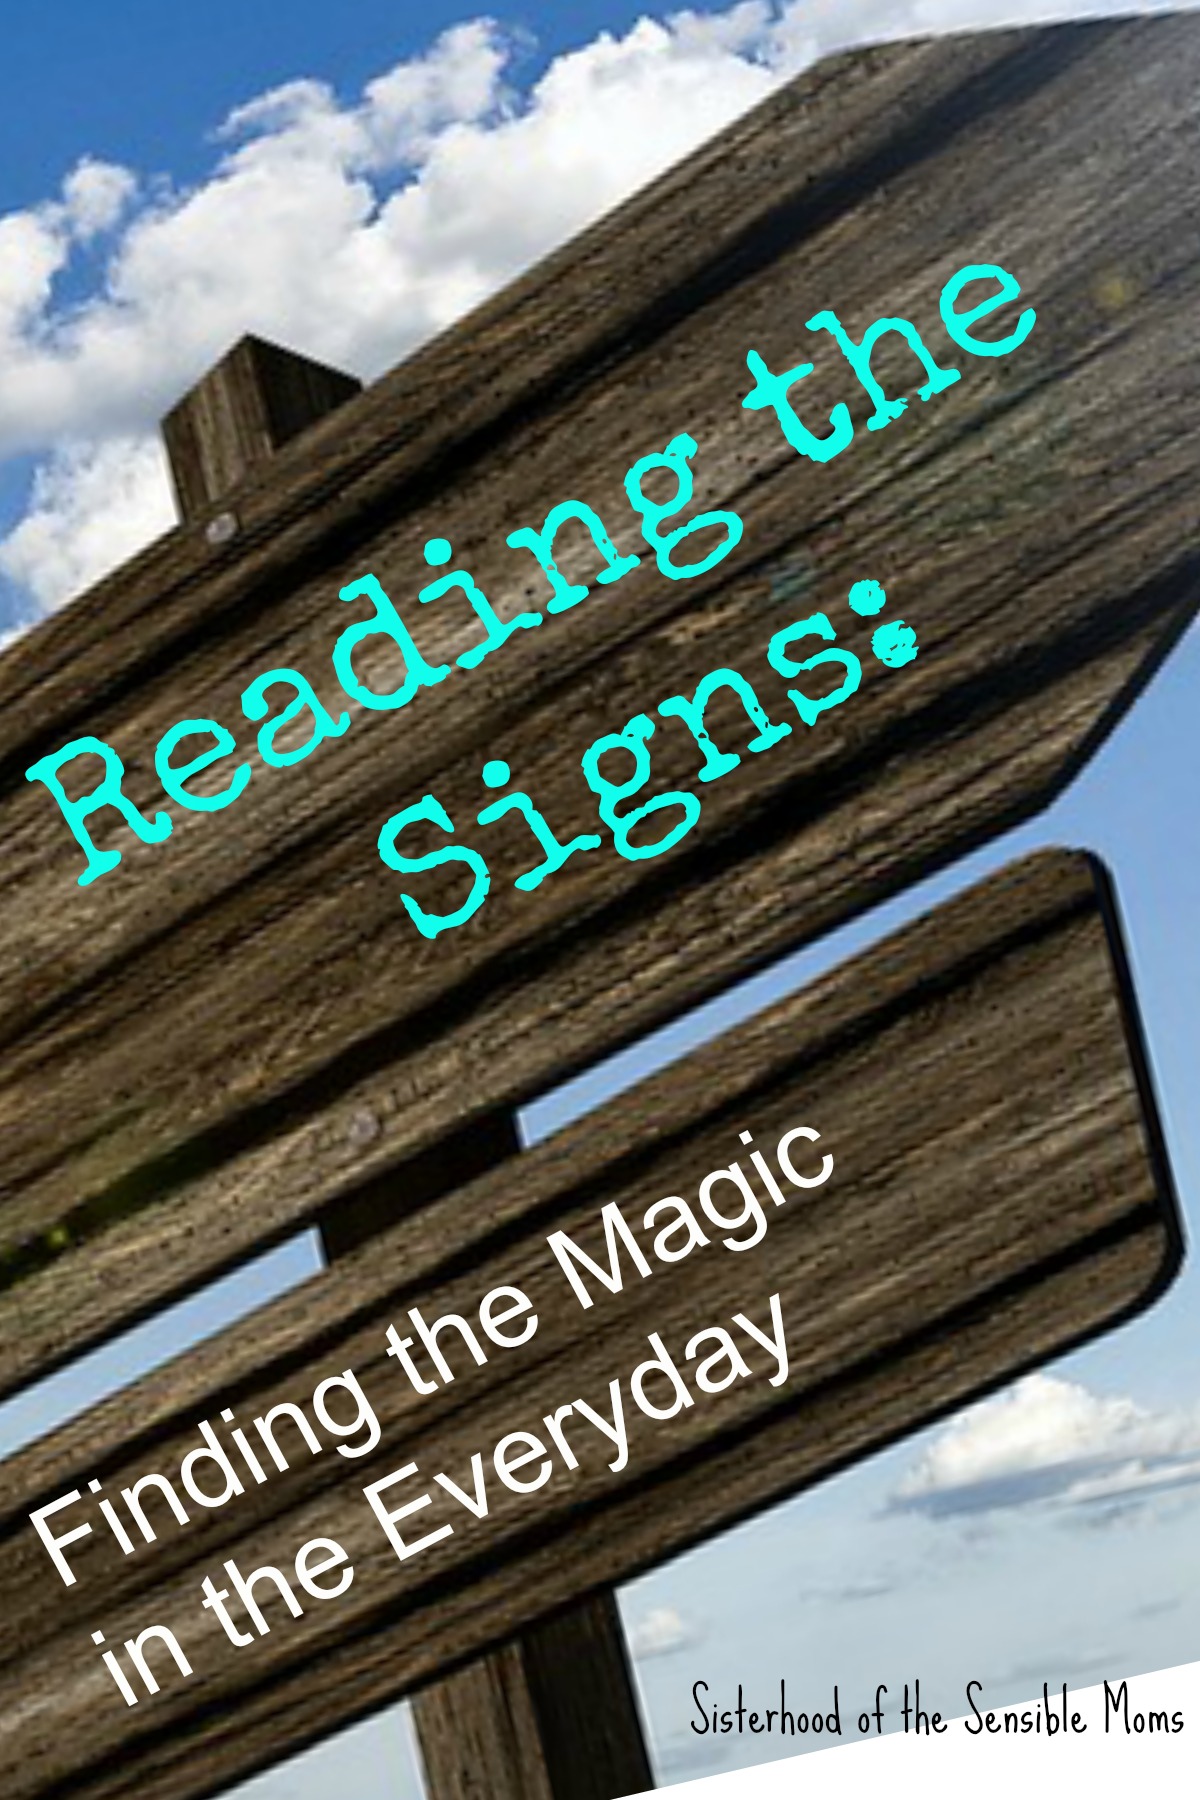 Reading the Signs: Finding the Magic in the Everyday | When honesty and serendipity intersect, inspiration happens.  This was a good sign that my life is just the right size for helping me find my way back to people I care about even in unexpected places.